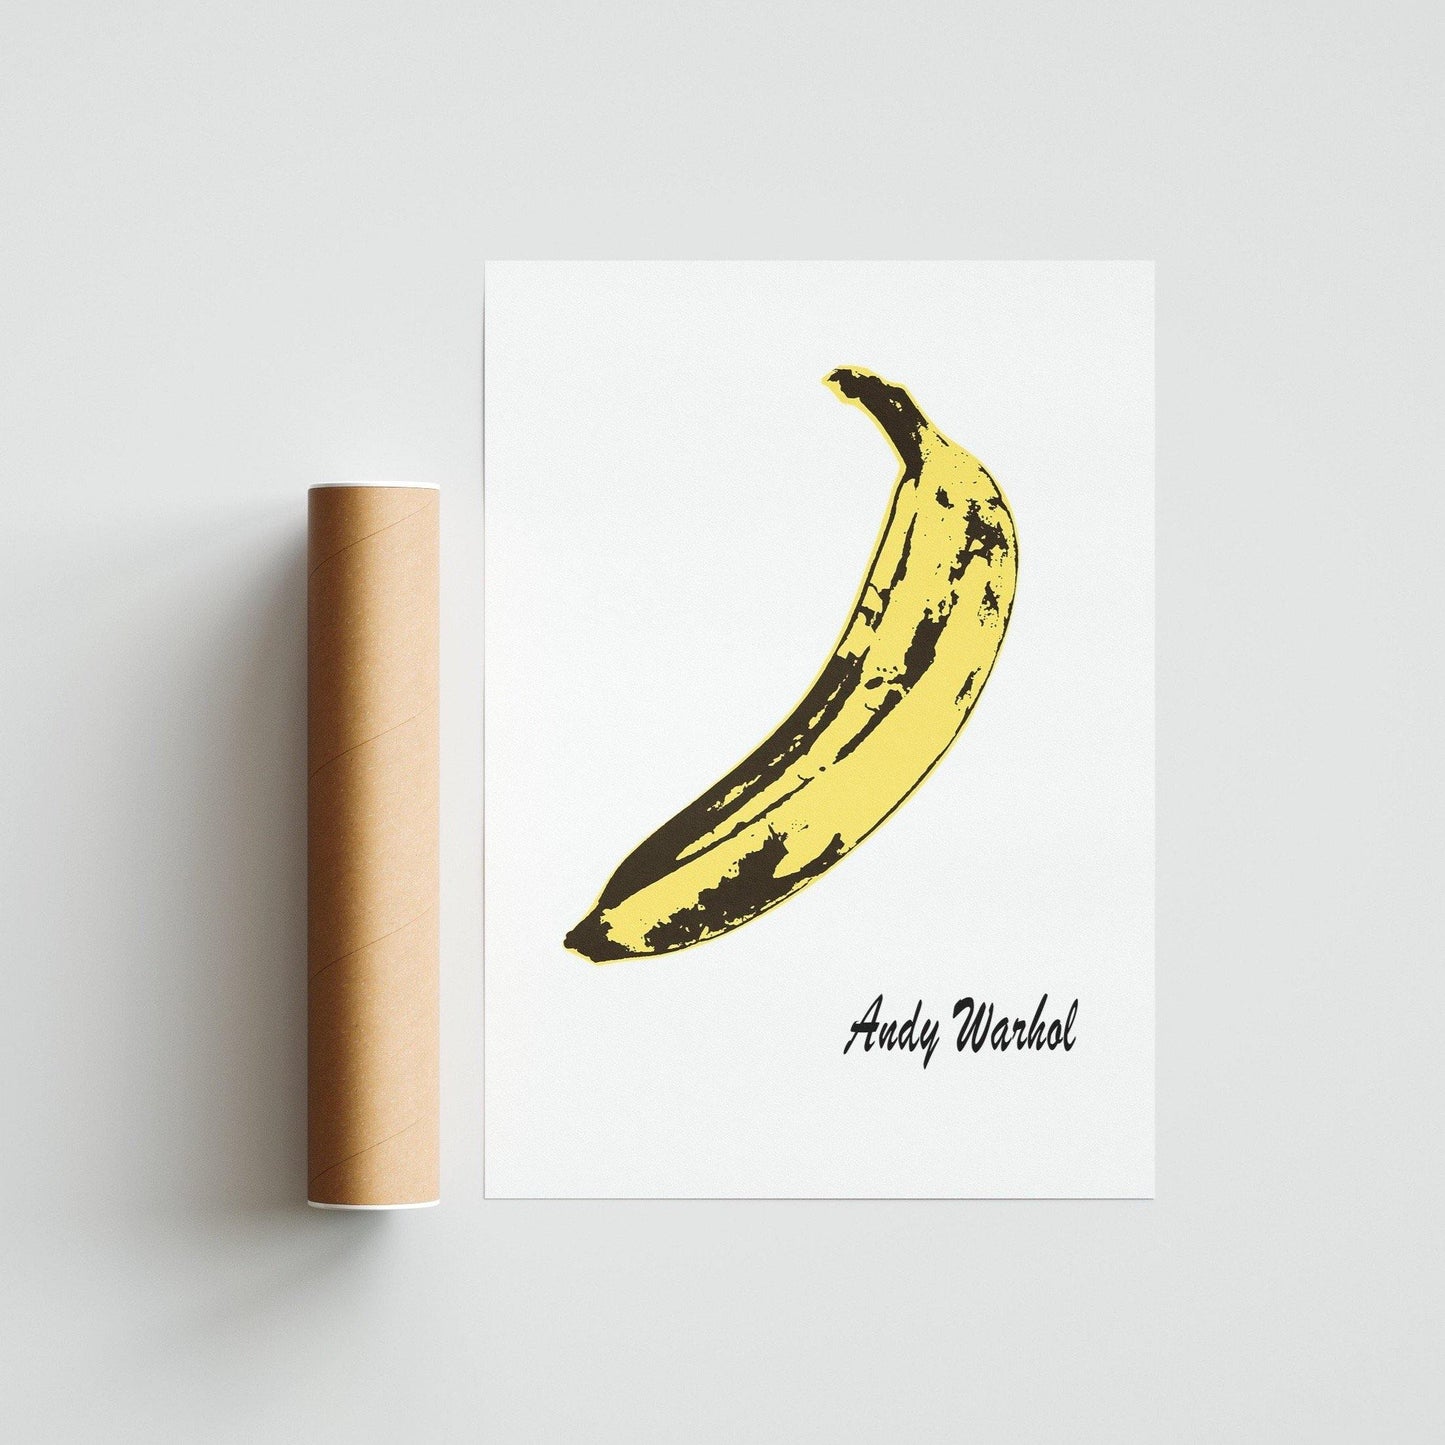 This isn't your average banana print. Inspired by the pop artist Andy Warhol, this playful print is a fun addition to any room. With bright colors and a whimsical design, it's sure to add a touch of personality to your space. Hang it on your wall or place it on a shelf, either way you'll love having this iconic banana print in your home.